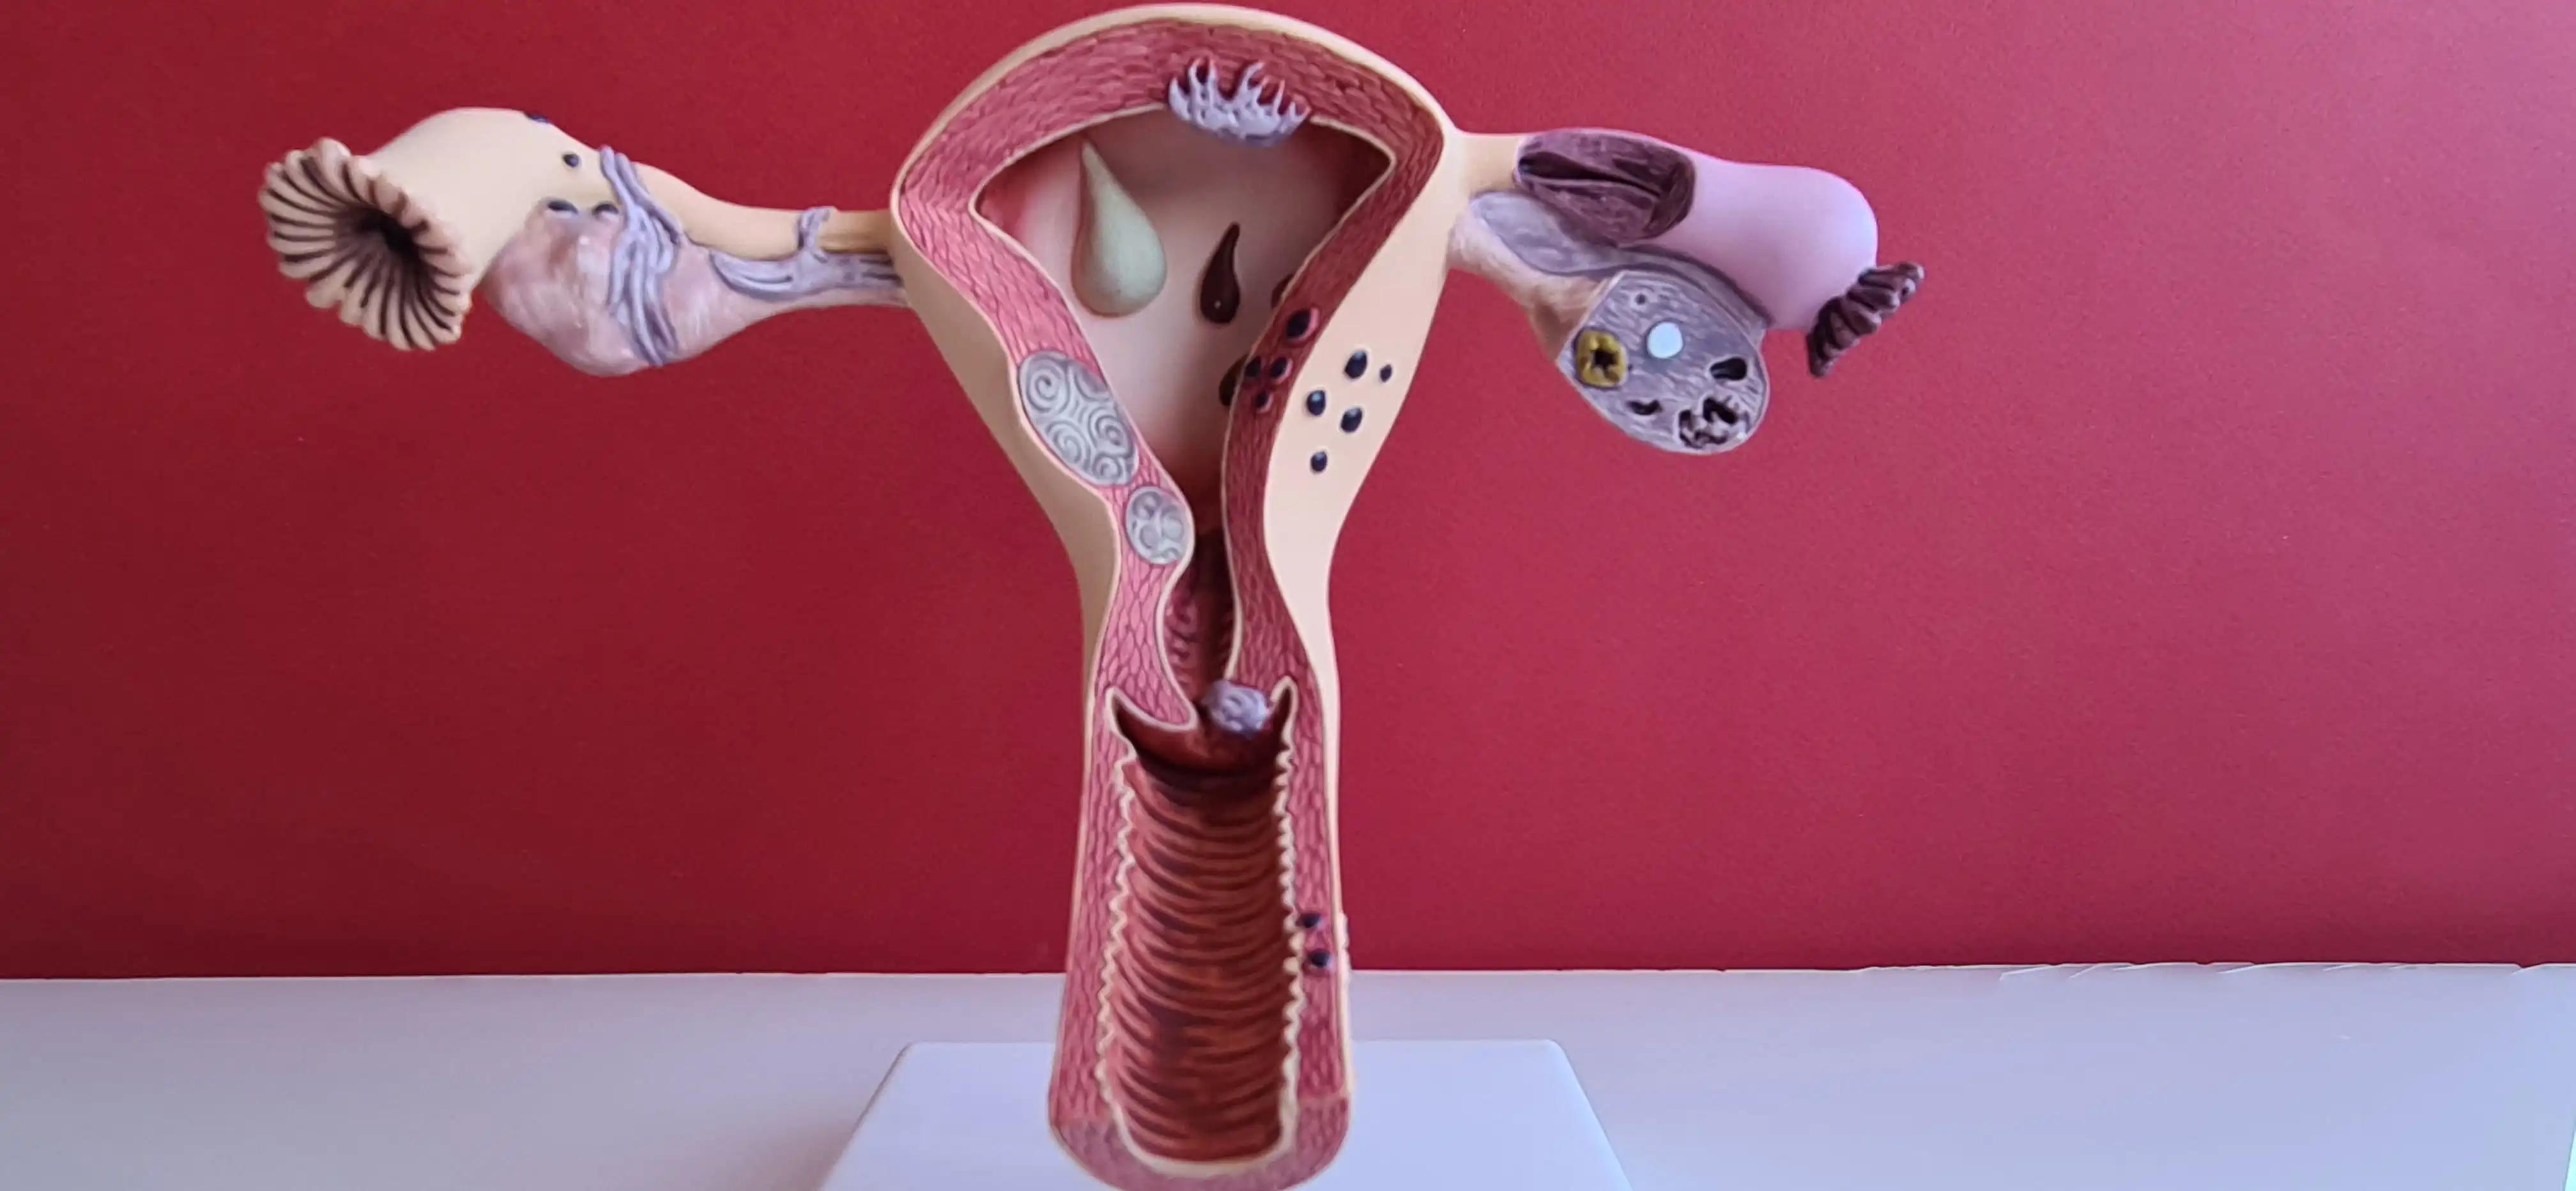 Uterus and Reproductive System of Woman